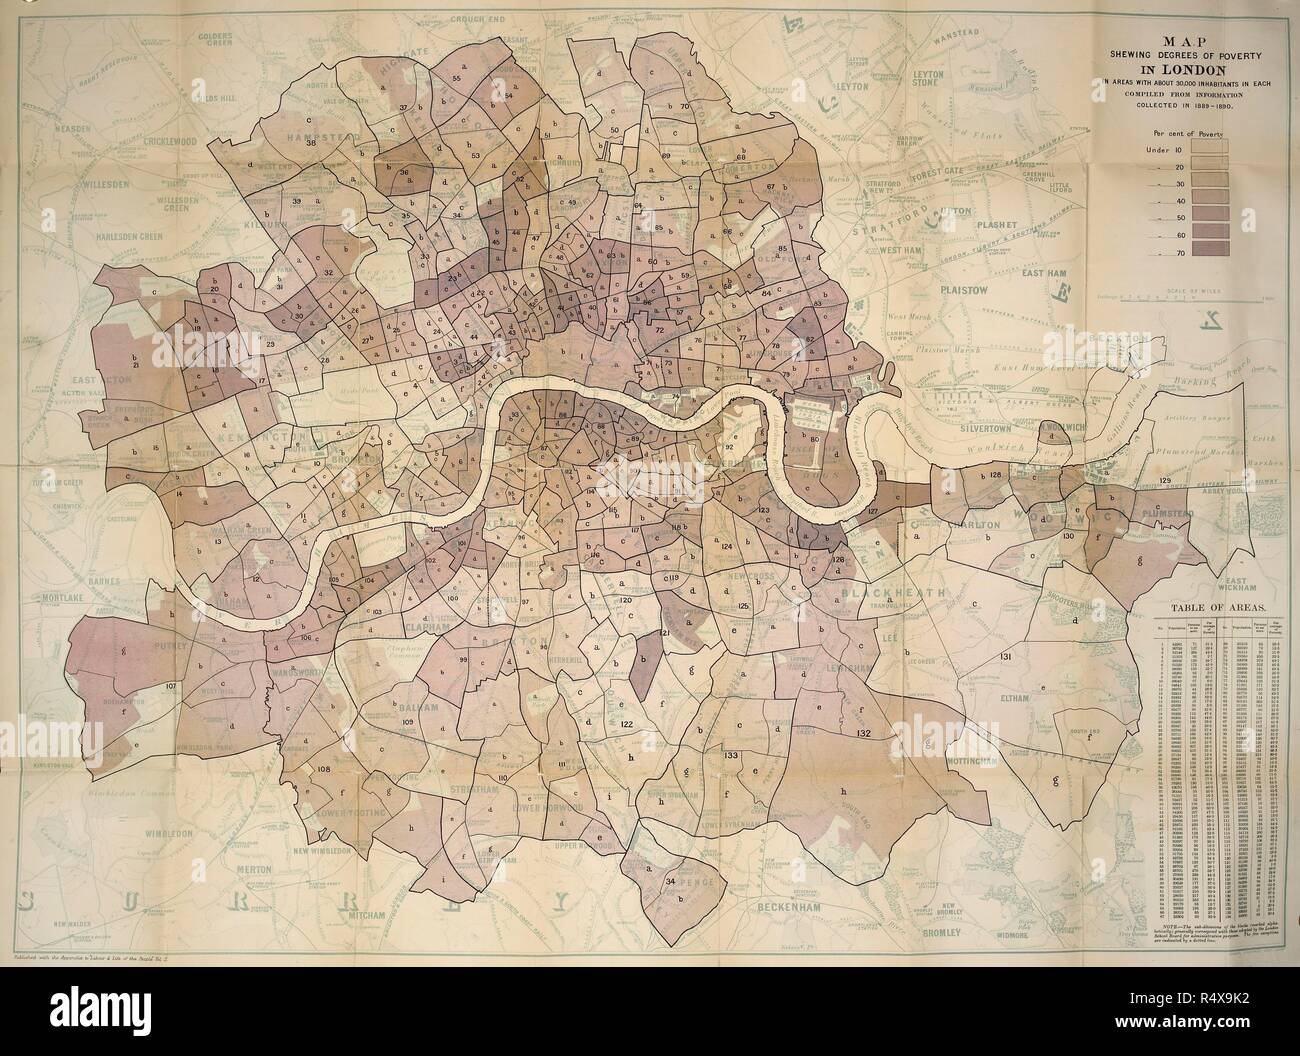 Booth's map of poverty levels in London, 1891. Descriptive map of London poverty 1889. London, England. Charles Booth, a shipowner, sought to refute socialist allegations that a quarter of Londonâ€™s population lived in poverty. He thought this exaggerated, but his researches, published in 17 volumes, revealed that the true figure was even higher at one third. Here his extensive survey is presented in cartographical form with the levels of poverty colour coded. This sometimes conceals as much as it reveals. The purple of the mixed areas obscured much poverty while domestic servants in the yell Stock Photo